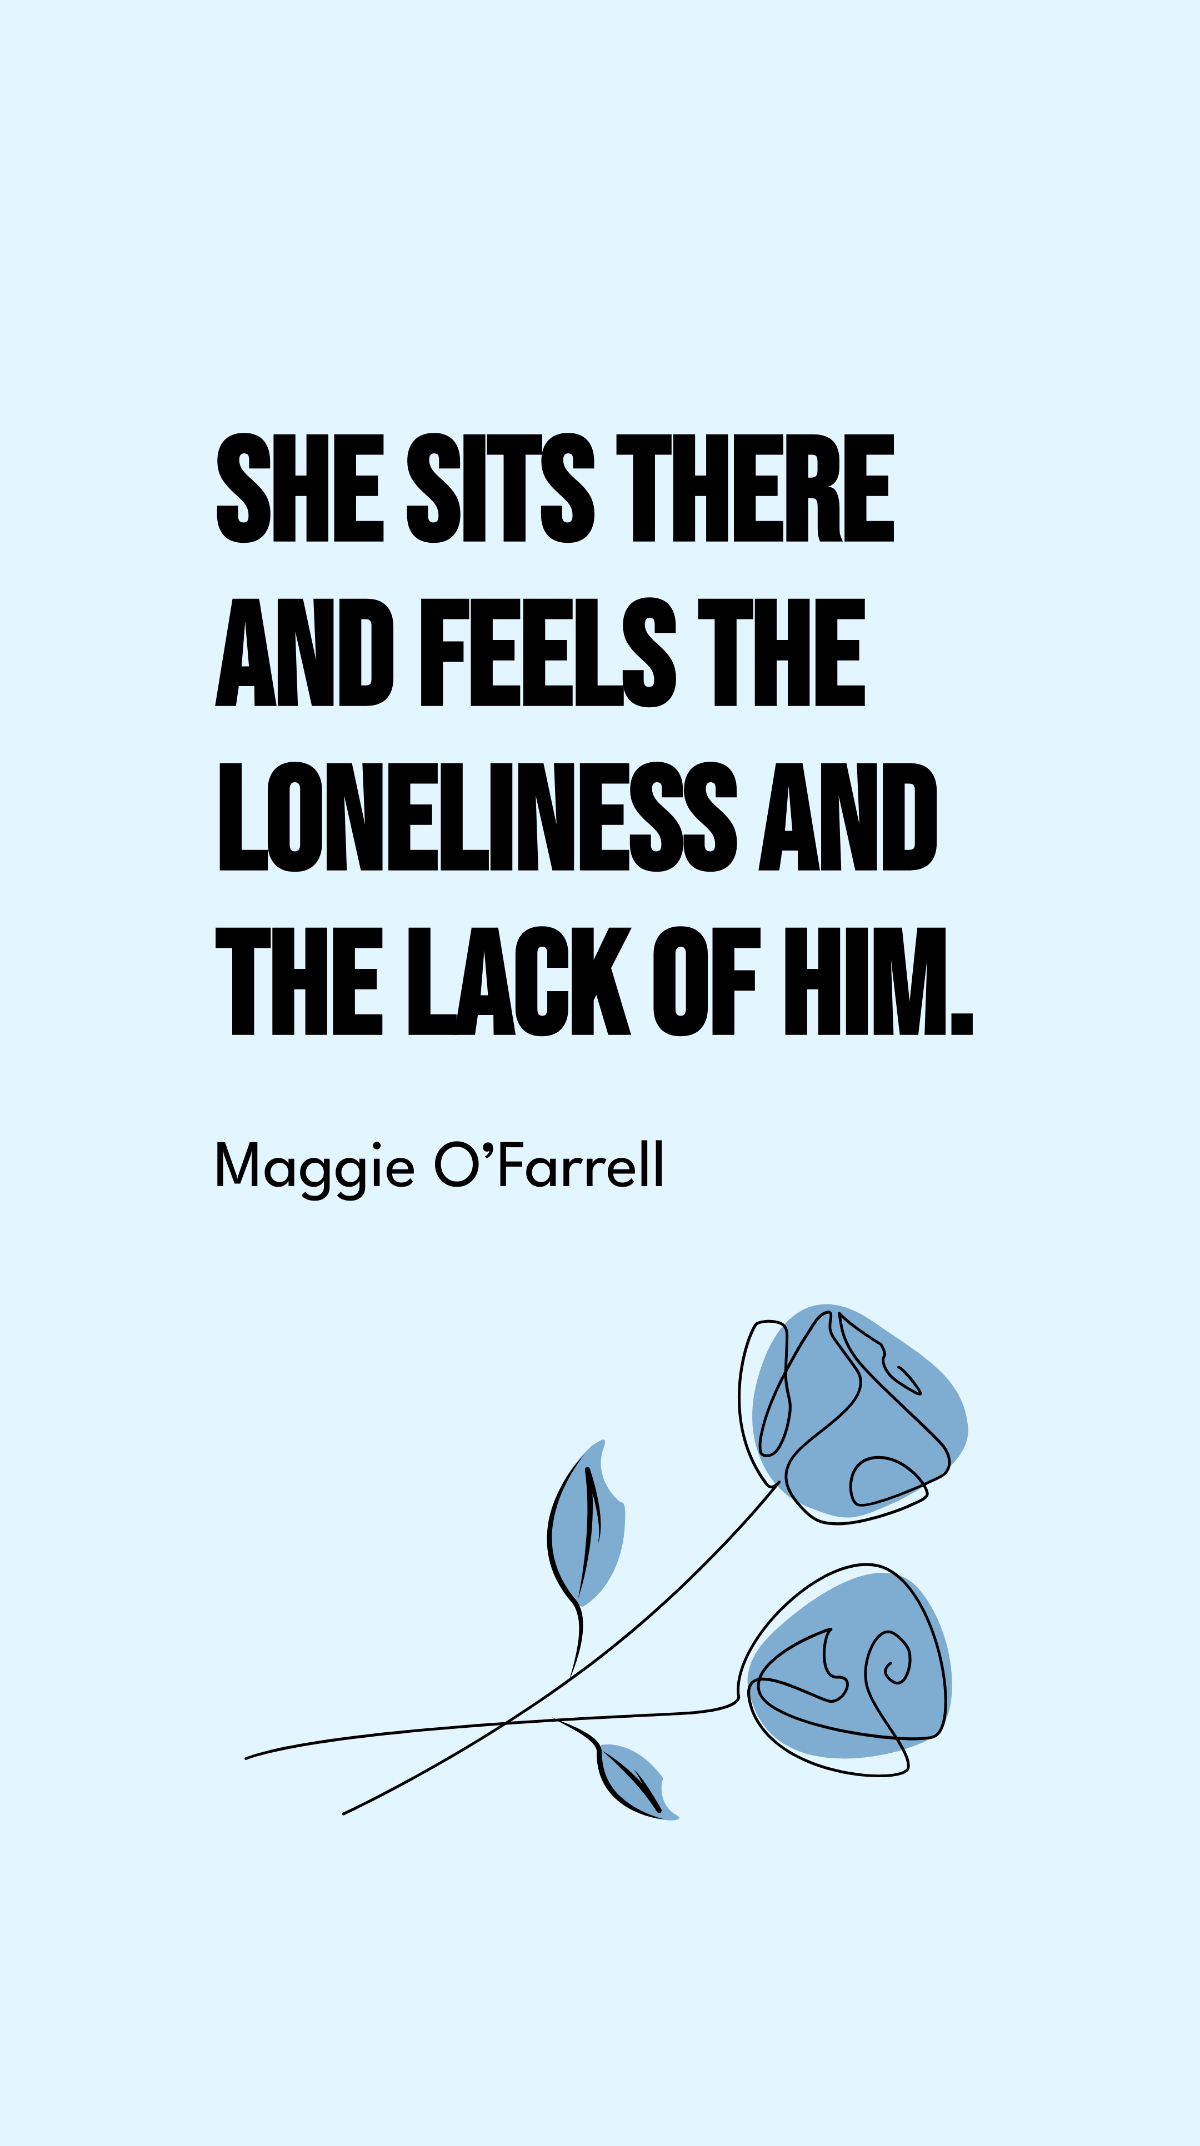 Maggie O’Farrell - She sits there and feels the loneliness and the lack of him. Template